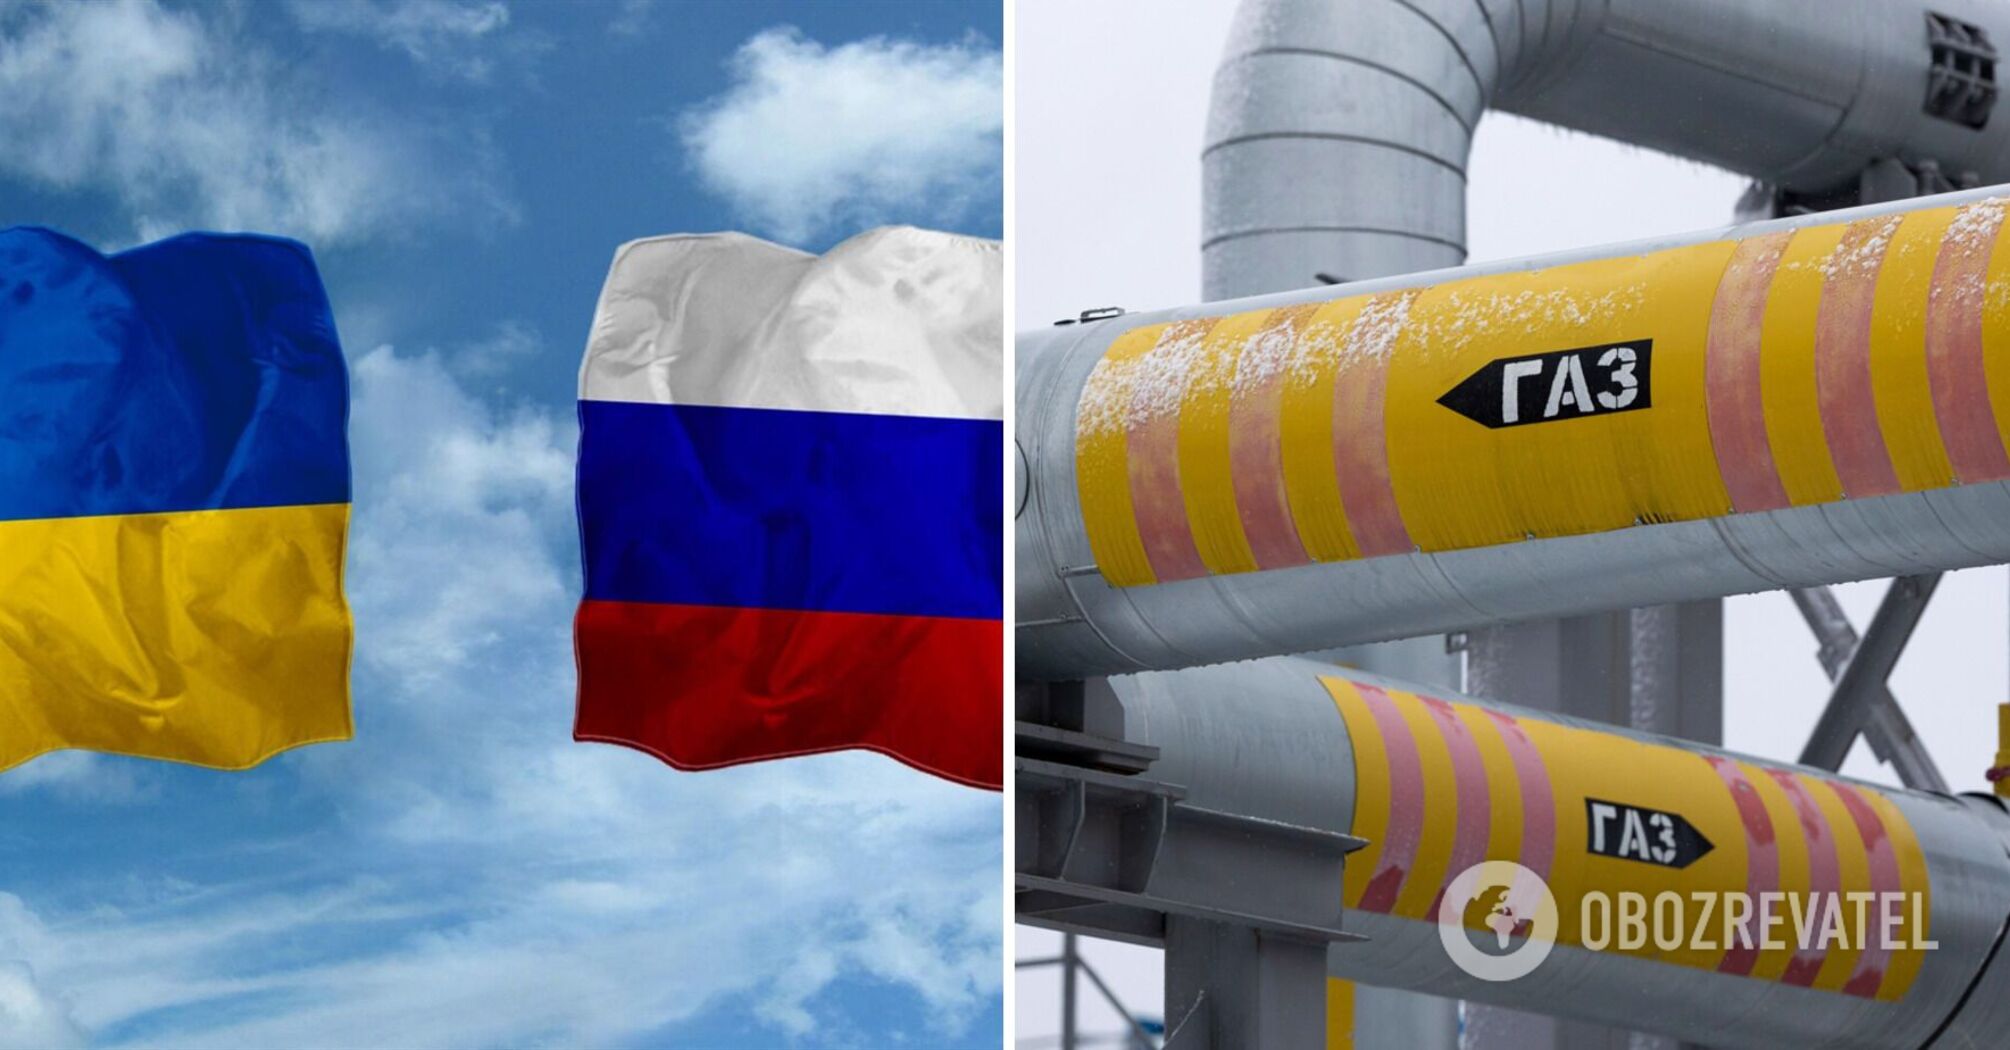 Ukraine will not negotiate with Russia on gas transit extension as there is no need for that